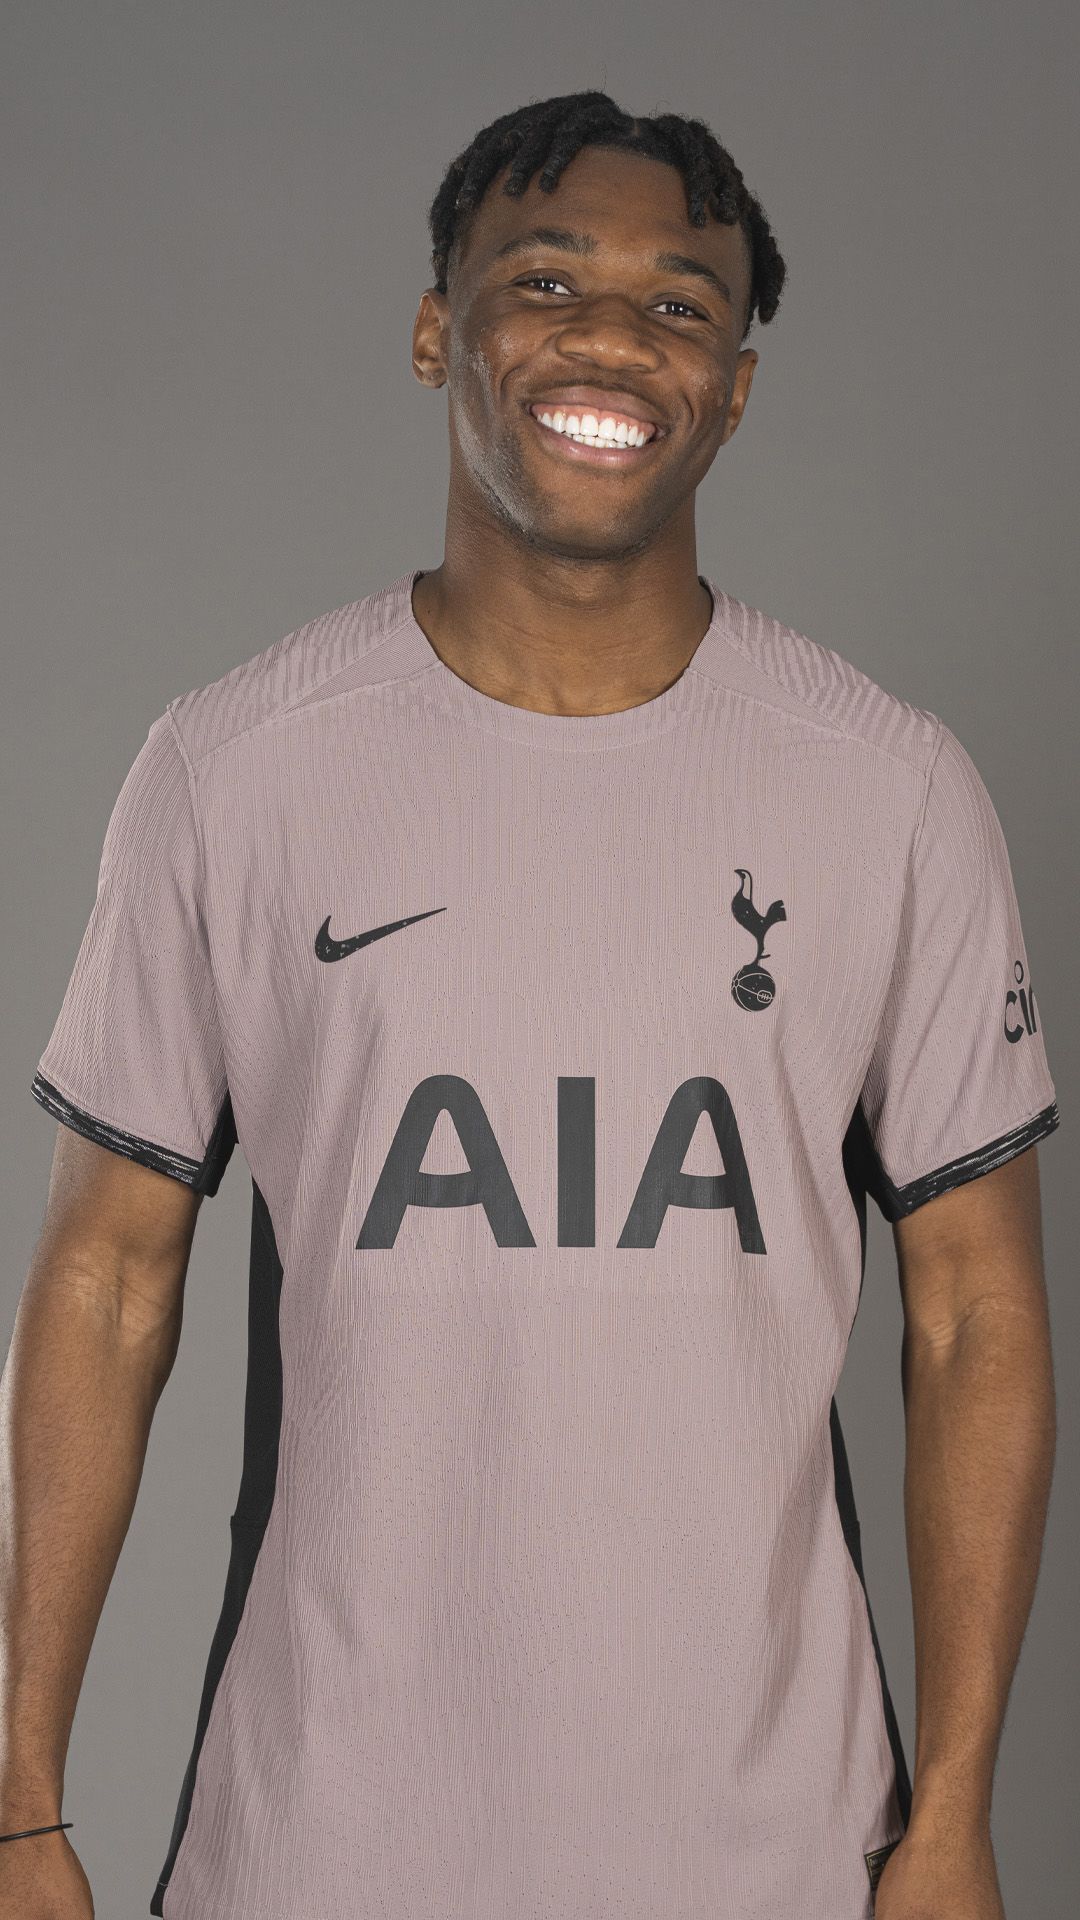 Tottenham's colourful new Nike third shirt appears for sale online